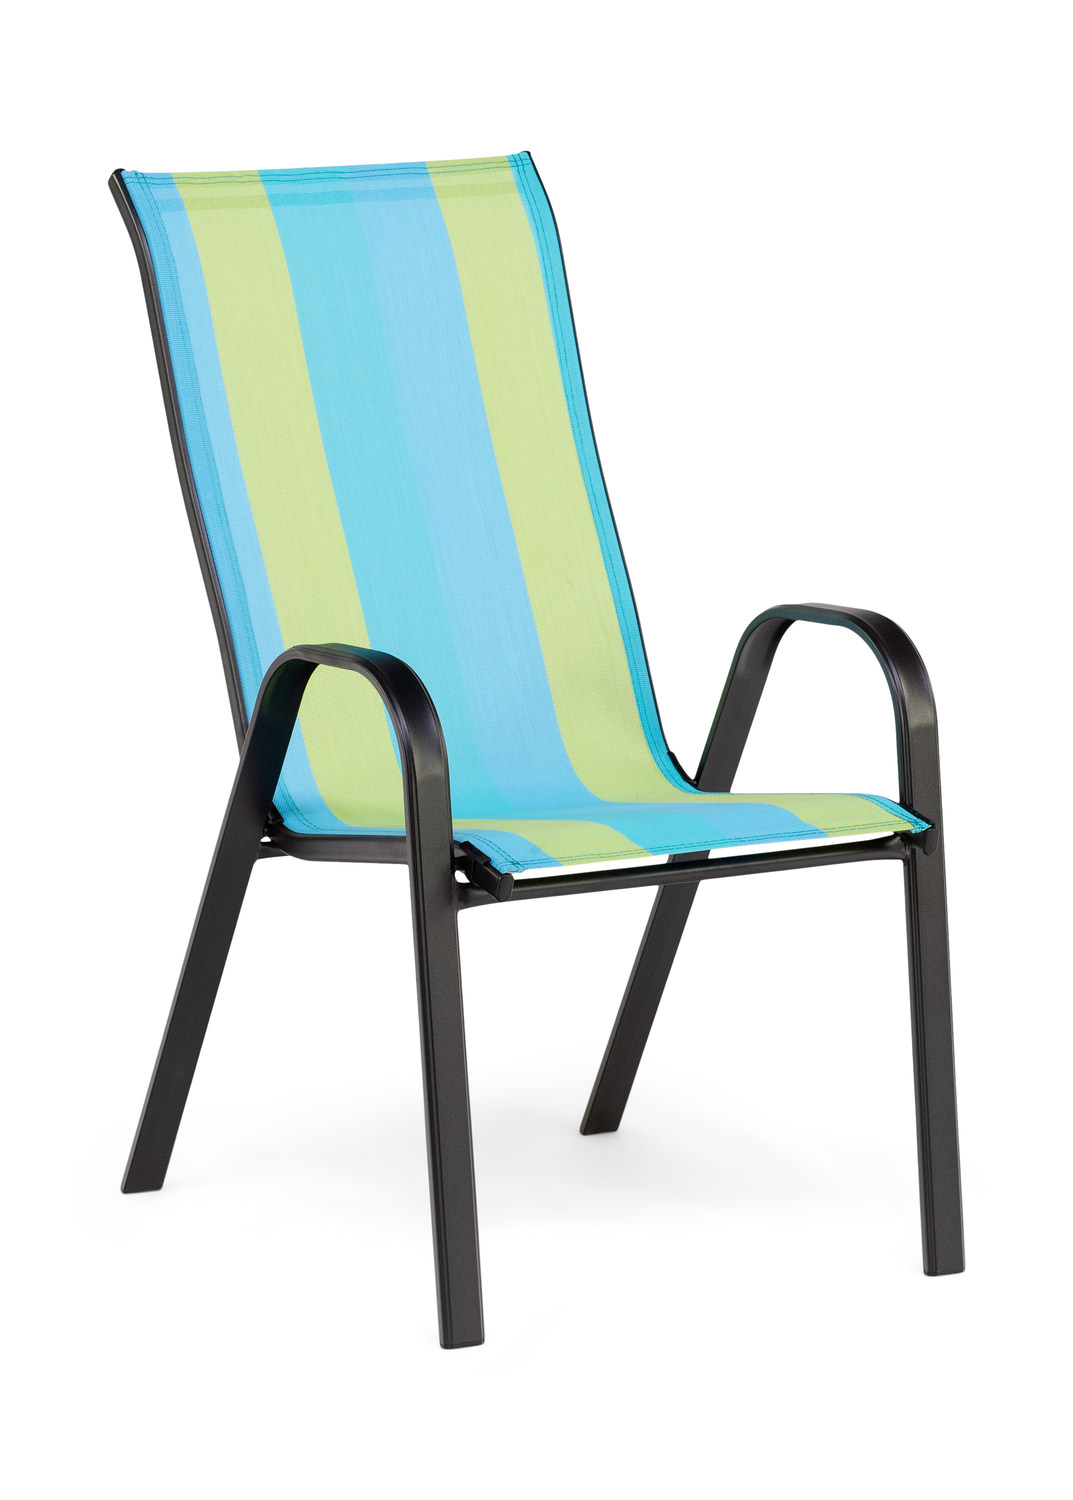 Park Lake Patio Chair By Furniture Creations Direct Dock86